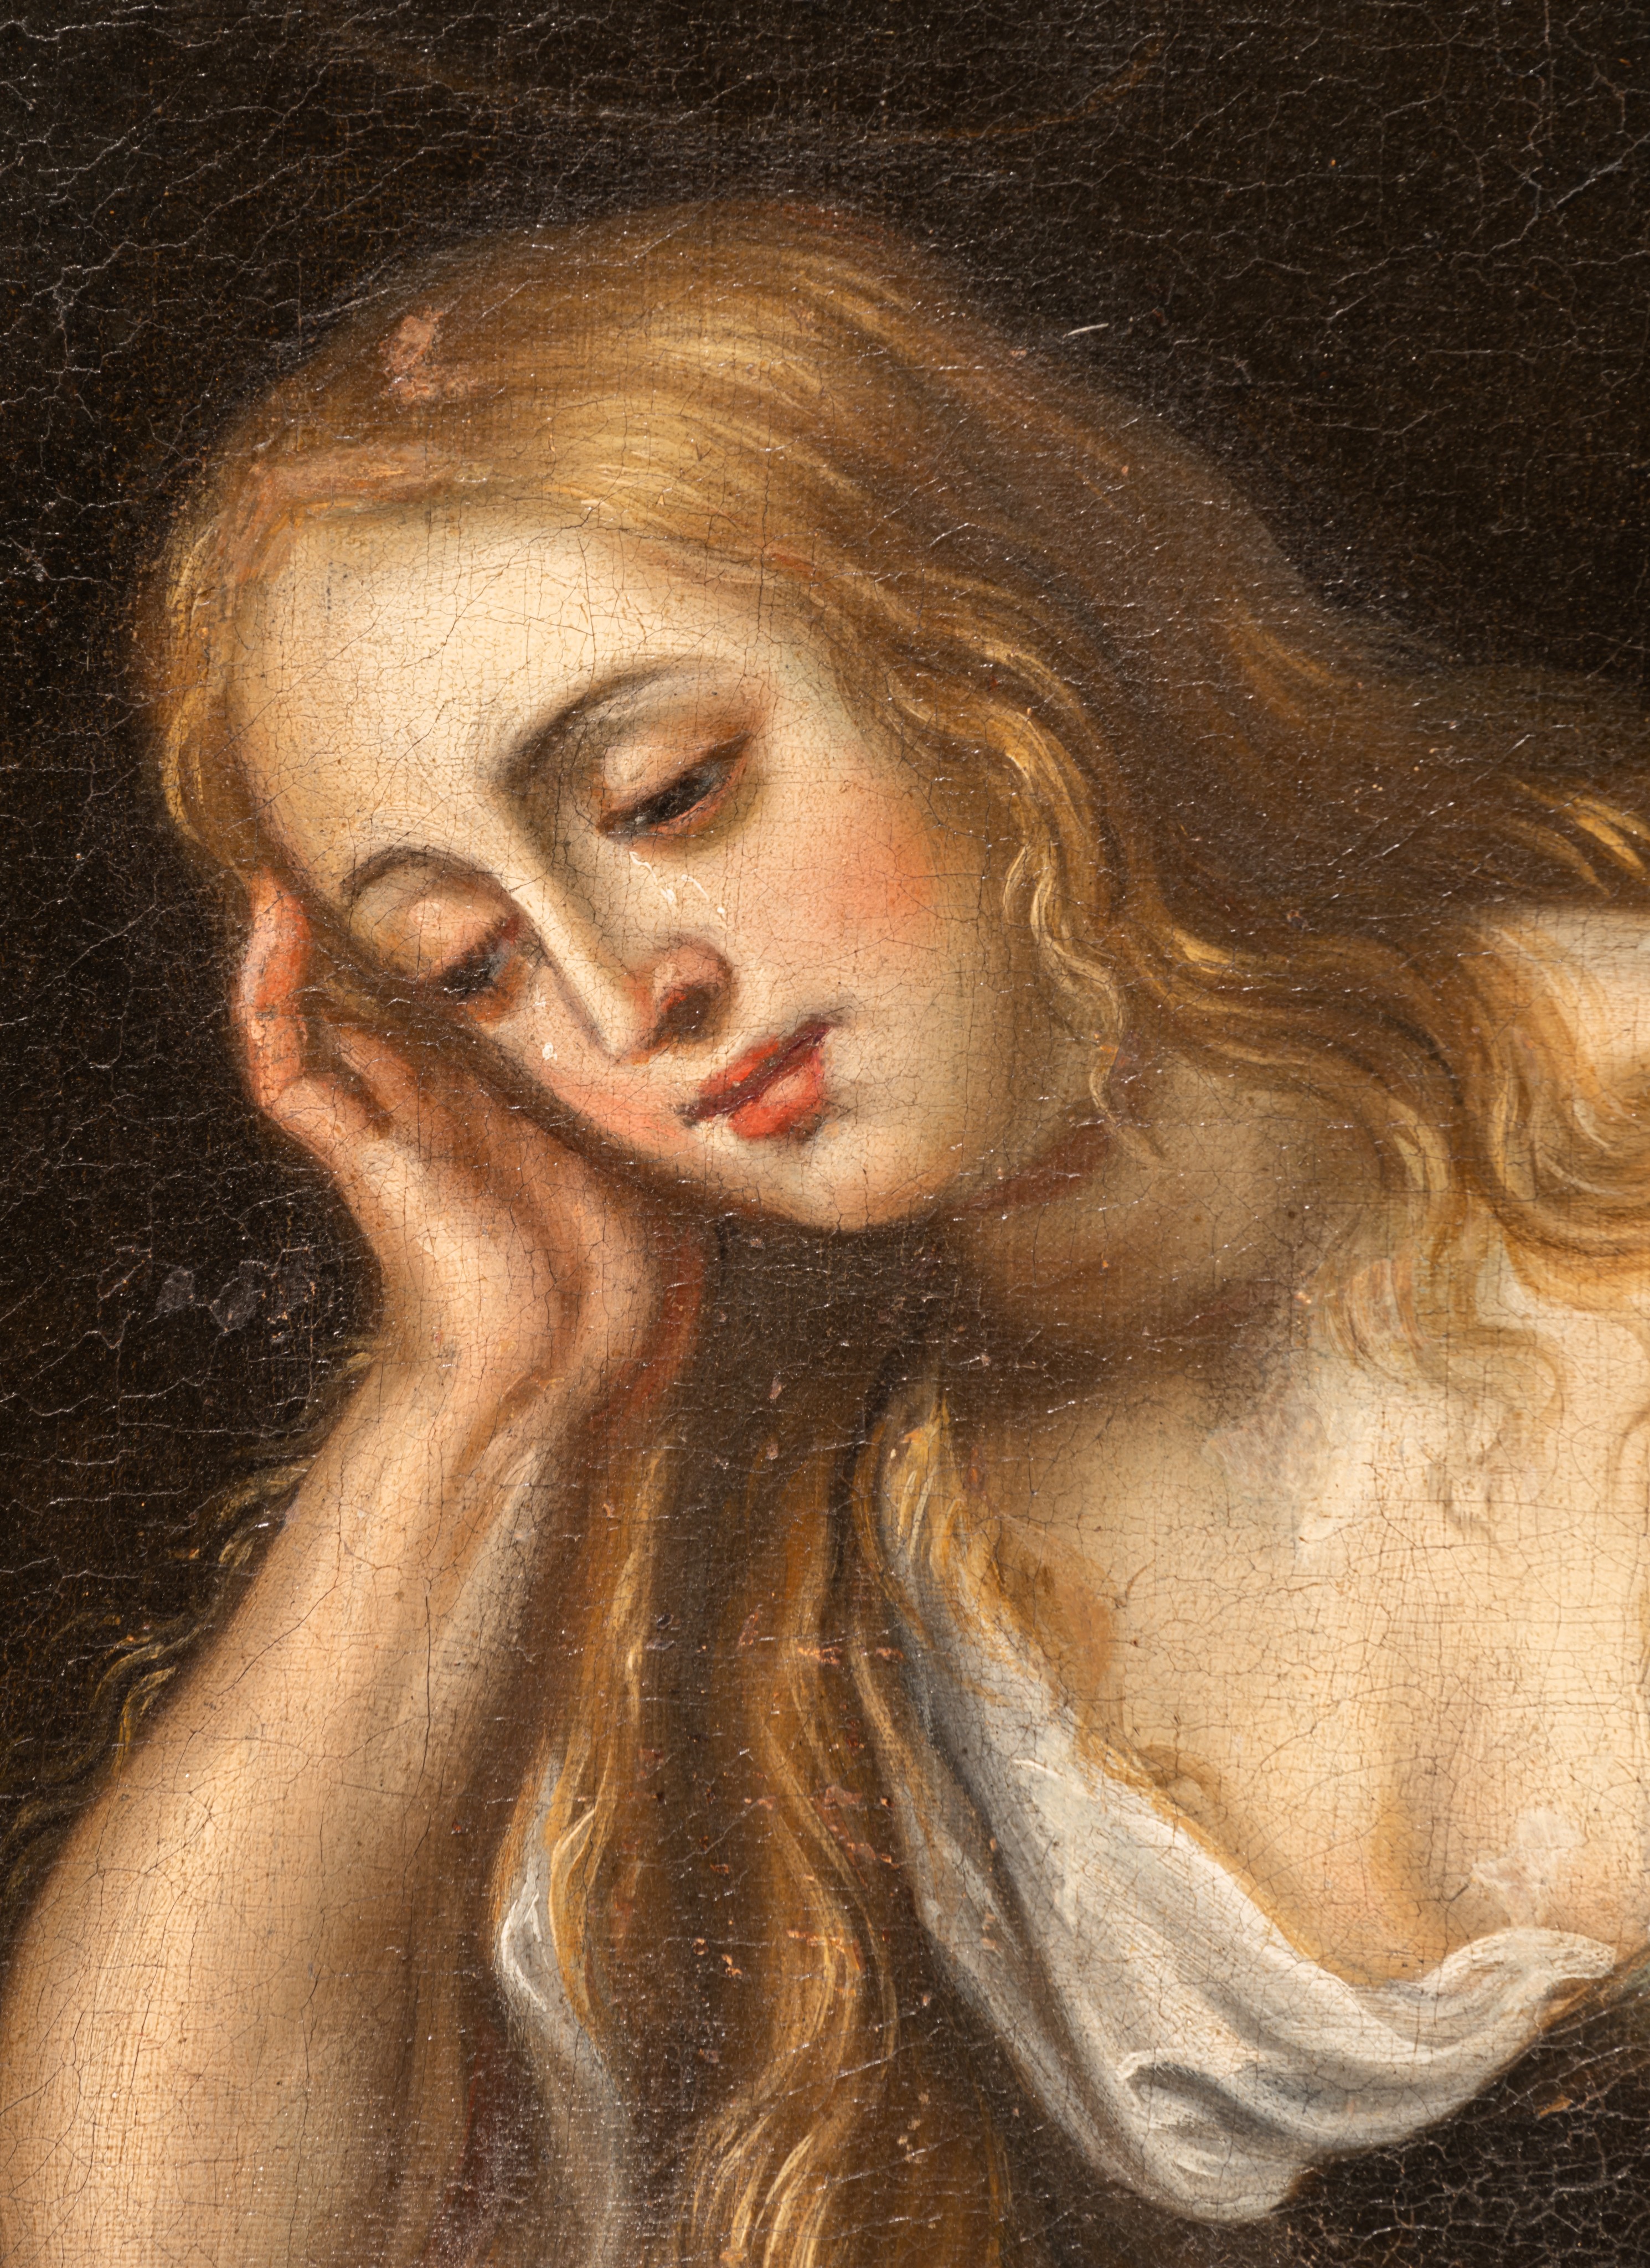 The penitent Mary Magdalene, 17thC, oil on canvas 85 x 130 cm. (33.4 x 51.1 in.), Frame: 98 x 143 cm - Image 4 of 6